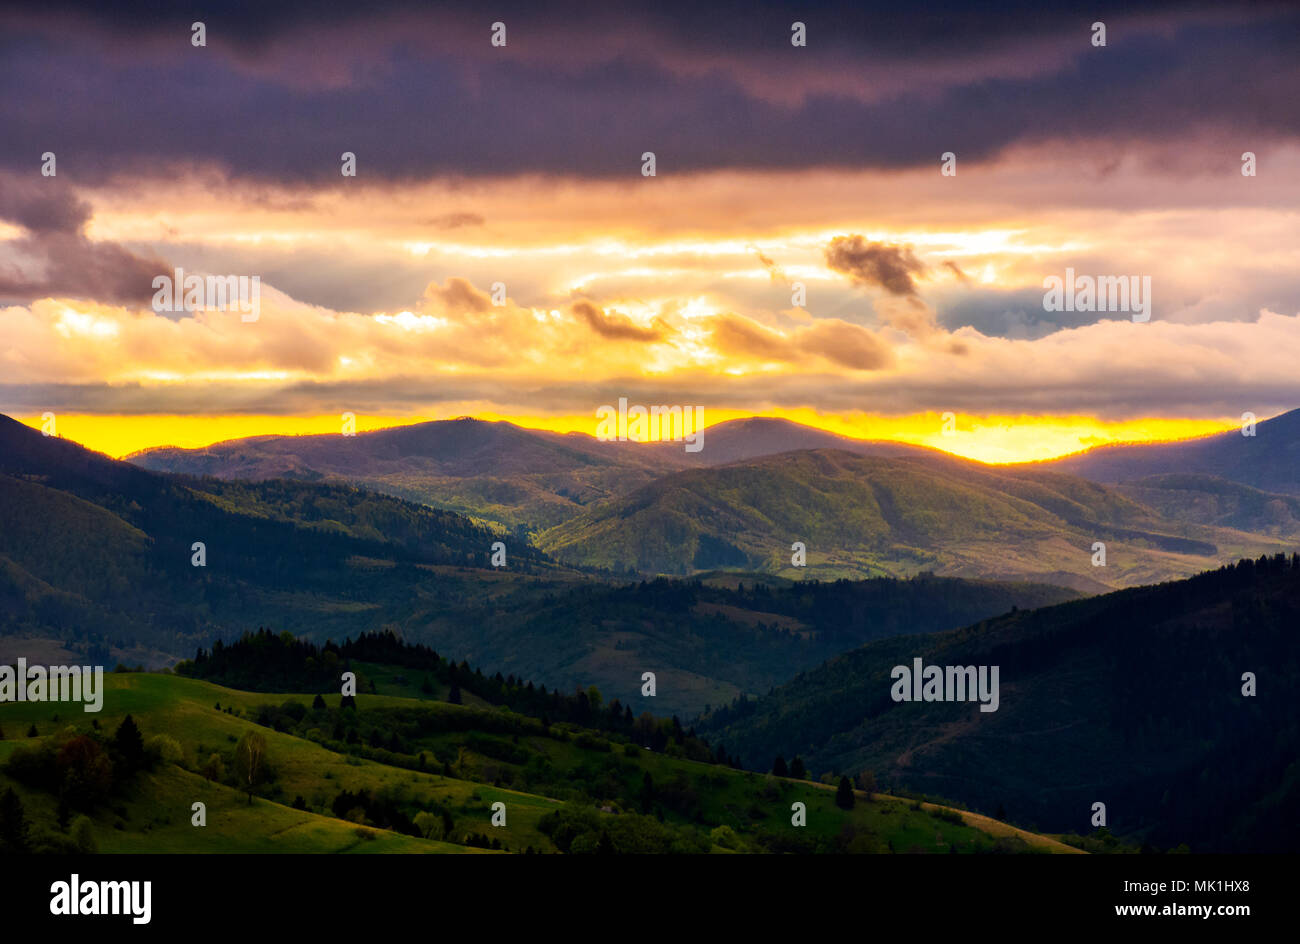 mountain rural area. agricultural fields on hills with forest. beautiful and vivid countryside landscape with cloudy sky at sunset. Stock Photo